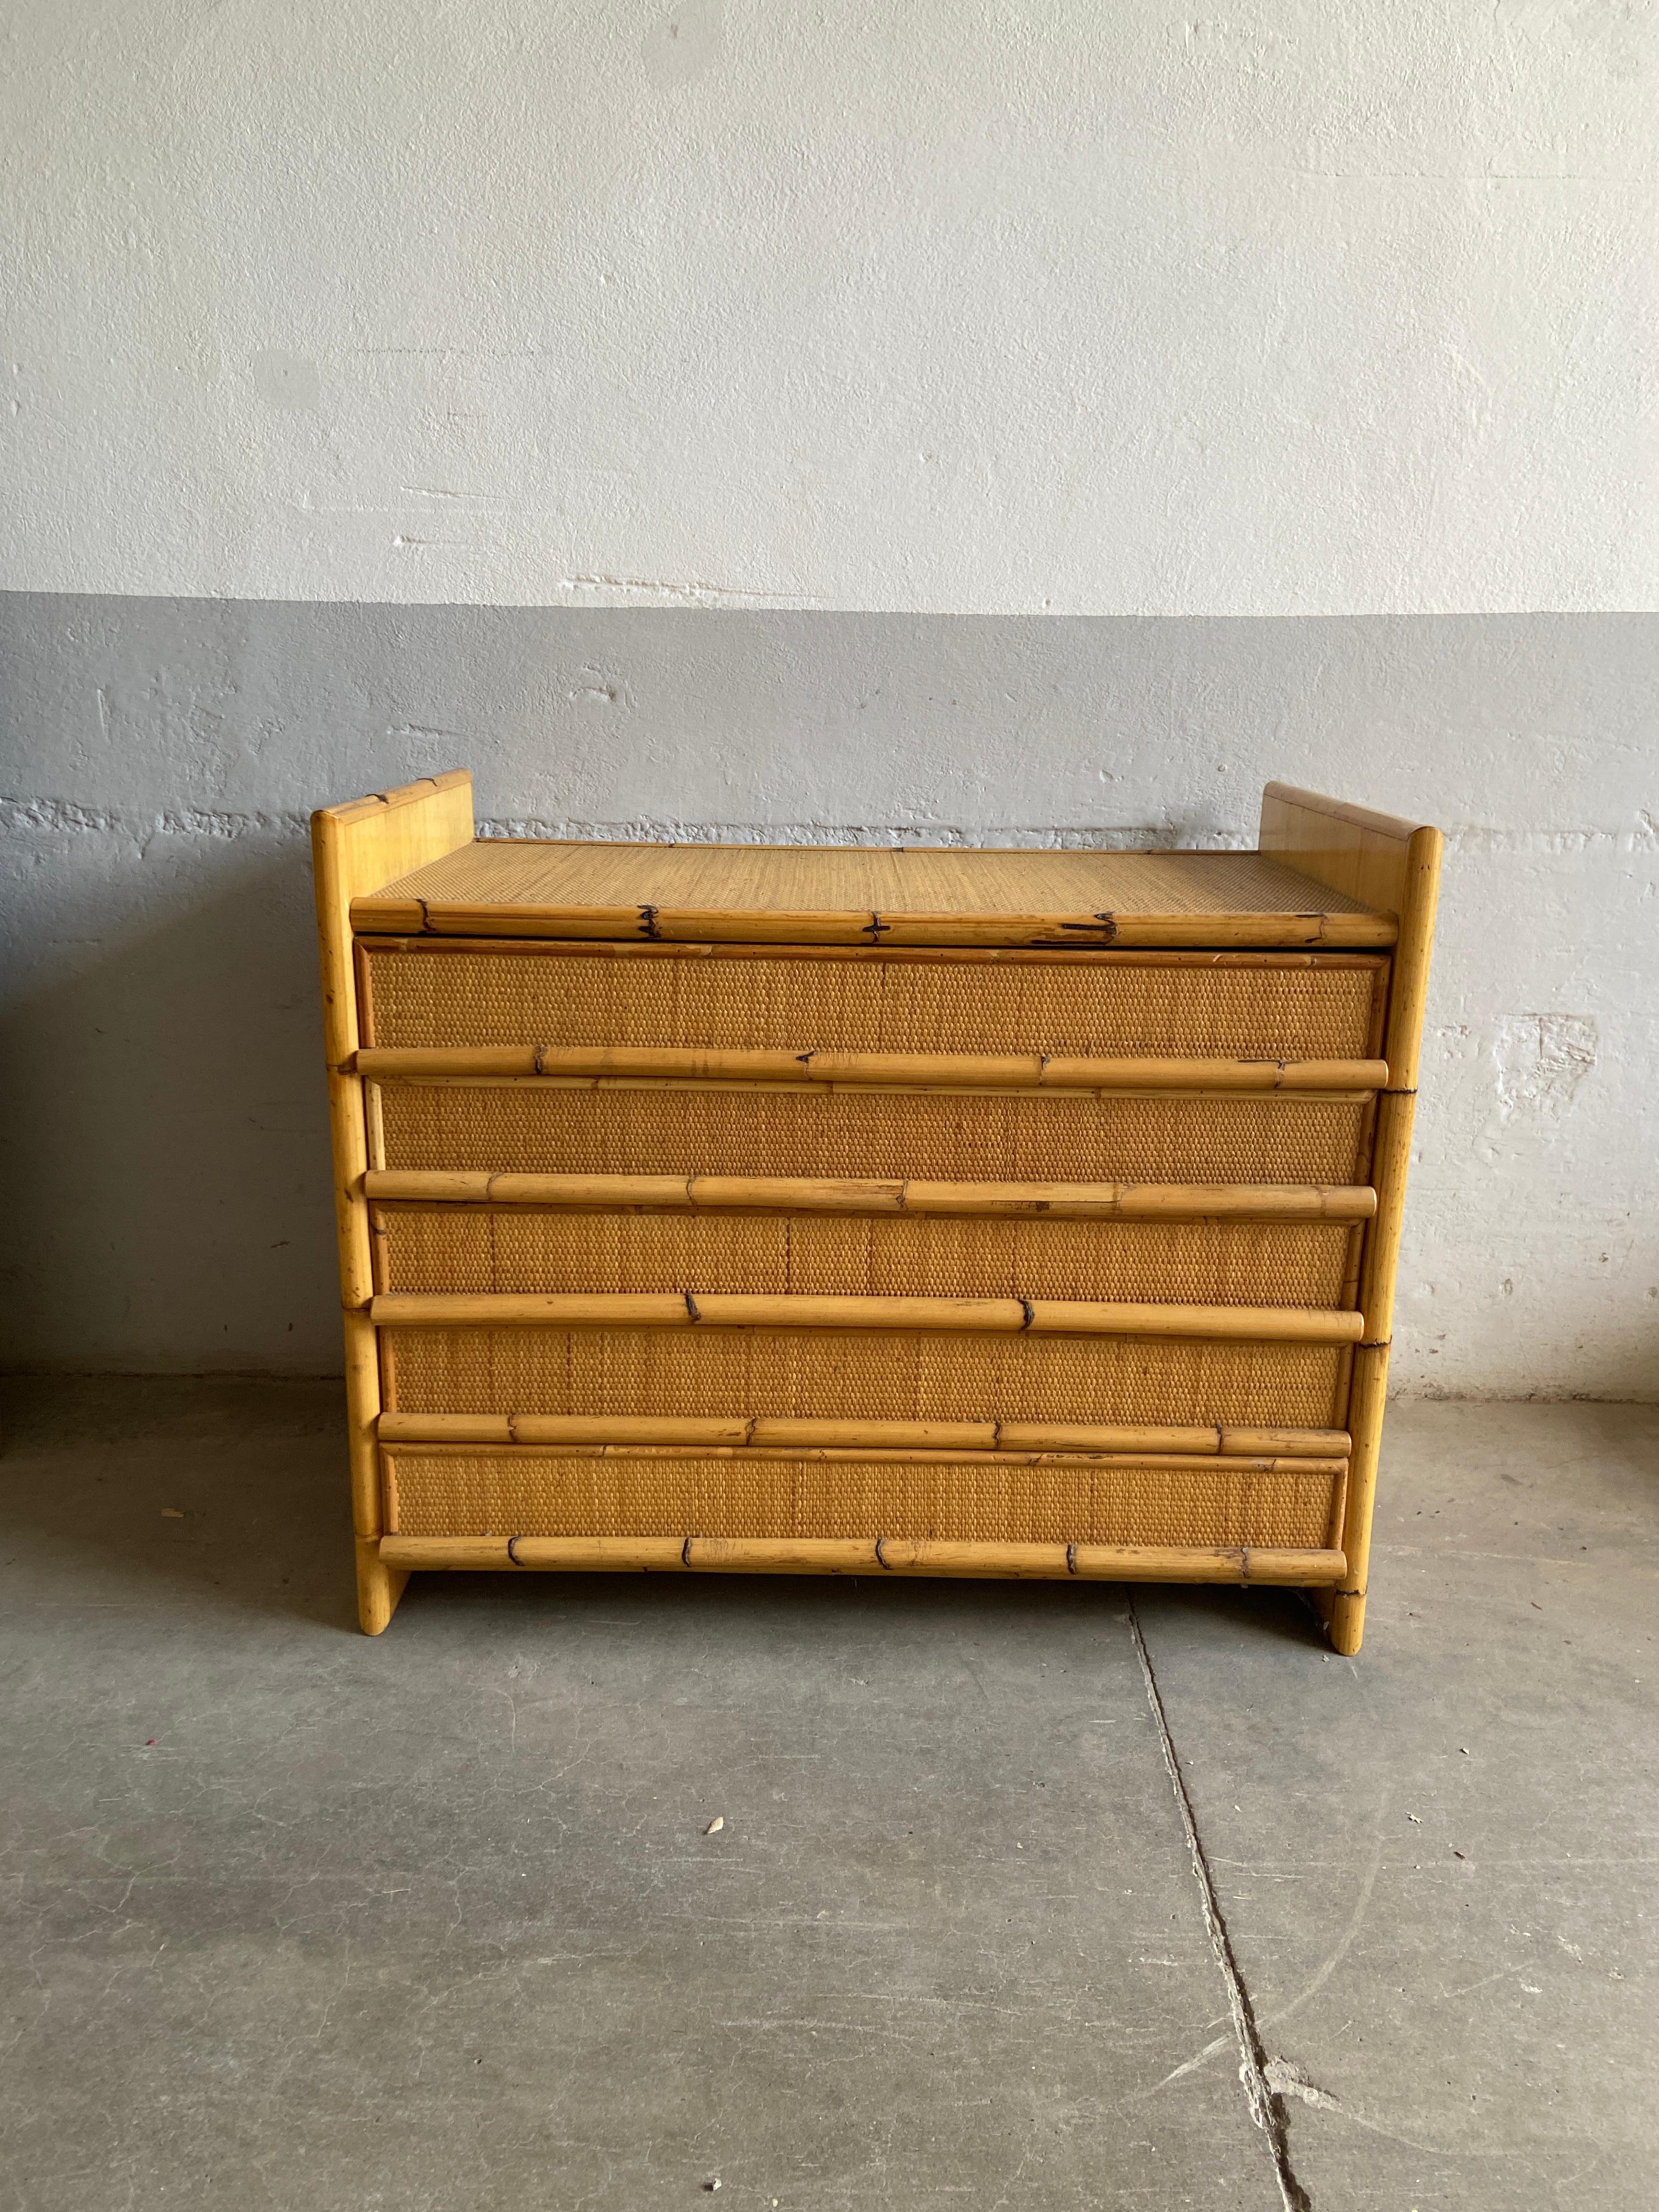 Mid-Century Modern Italian Bamboo and Rattan Chest of drawers.
Each of the 5 drawers has a full-length bamboo handle that gives a special, decorative look to the cabinet.
This piece has a really stunning patina due to age and use.